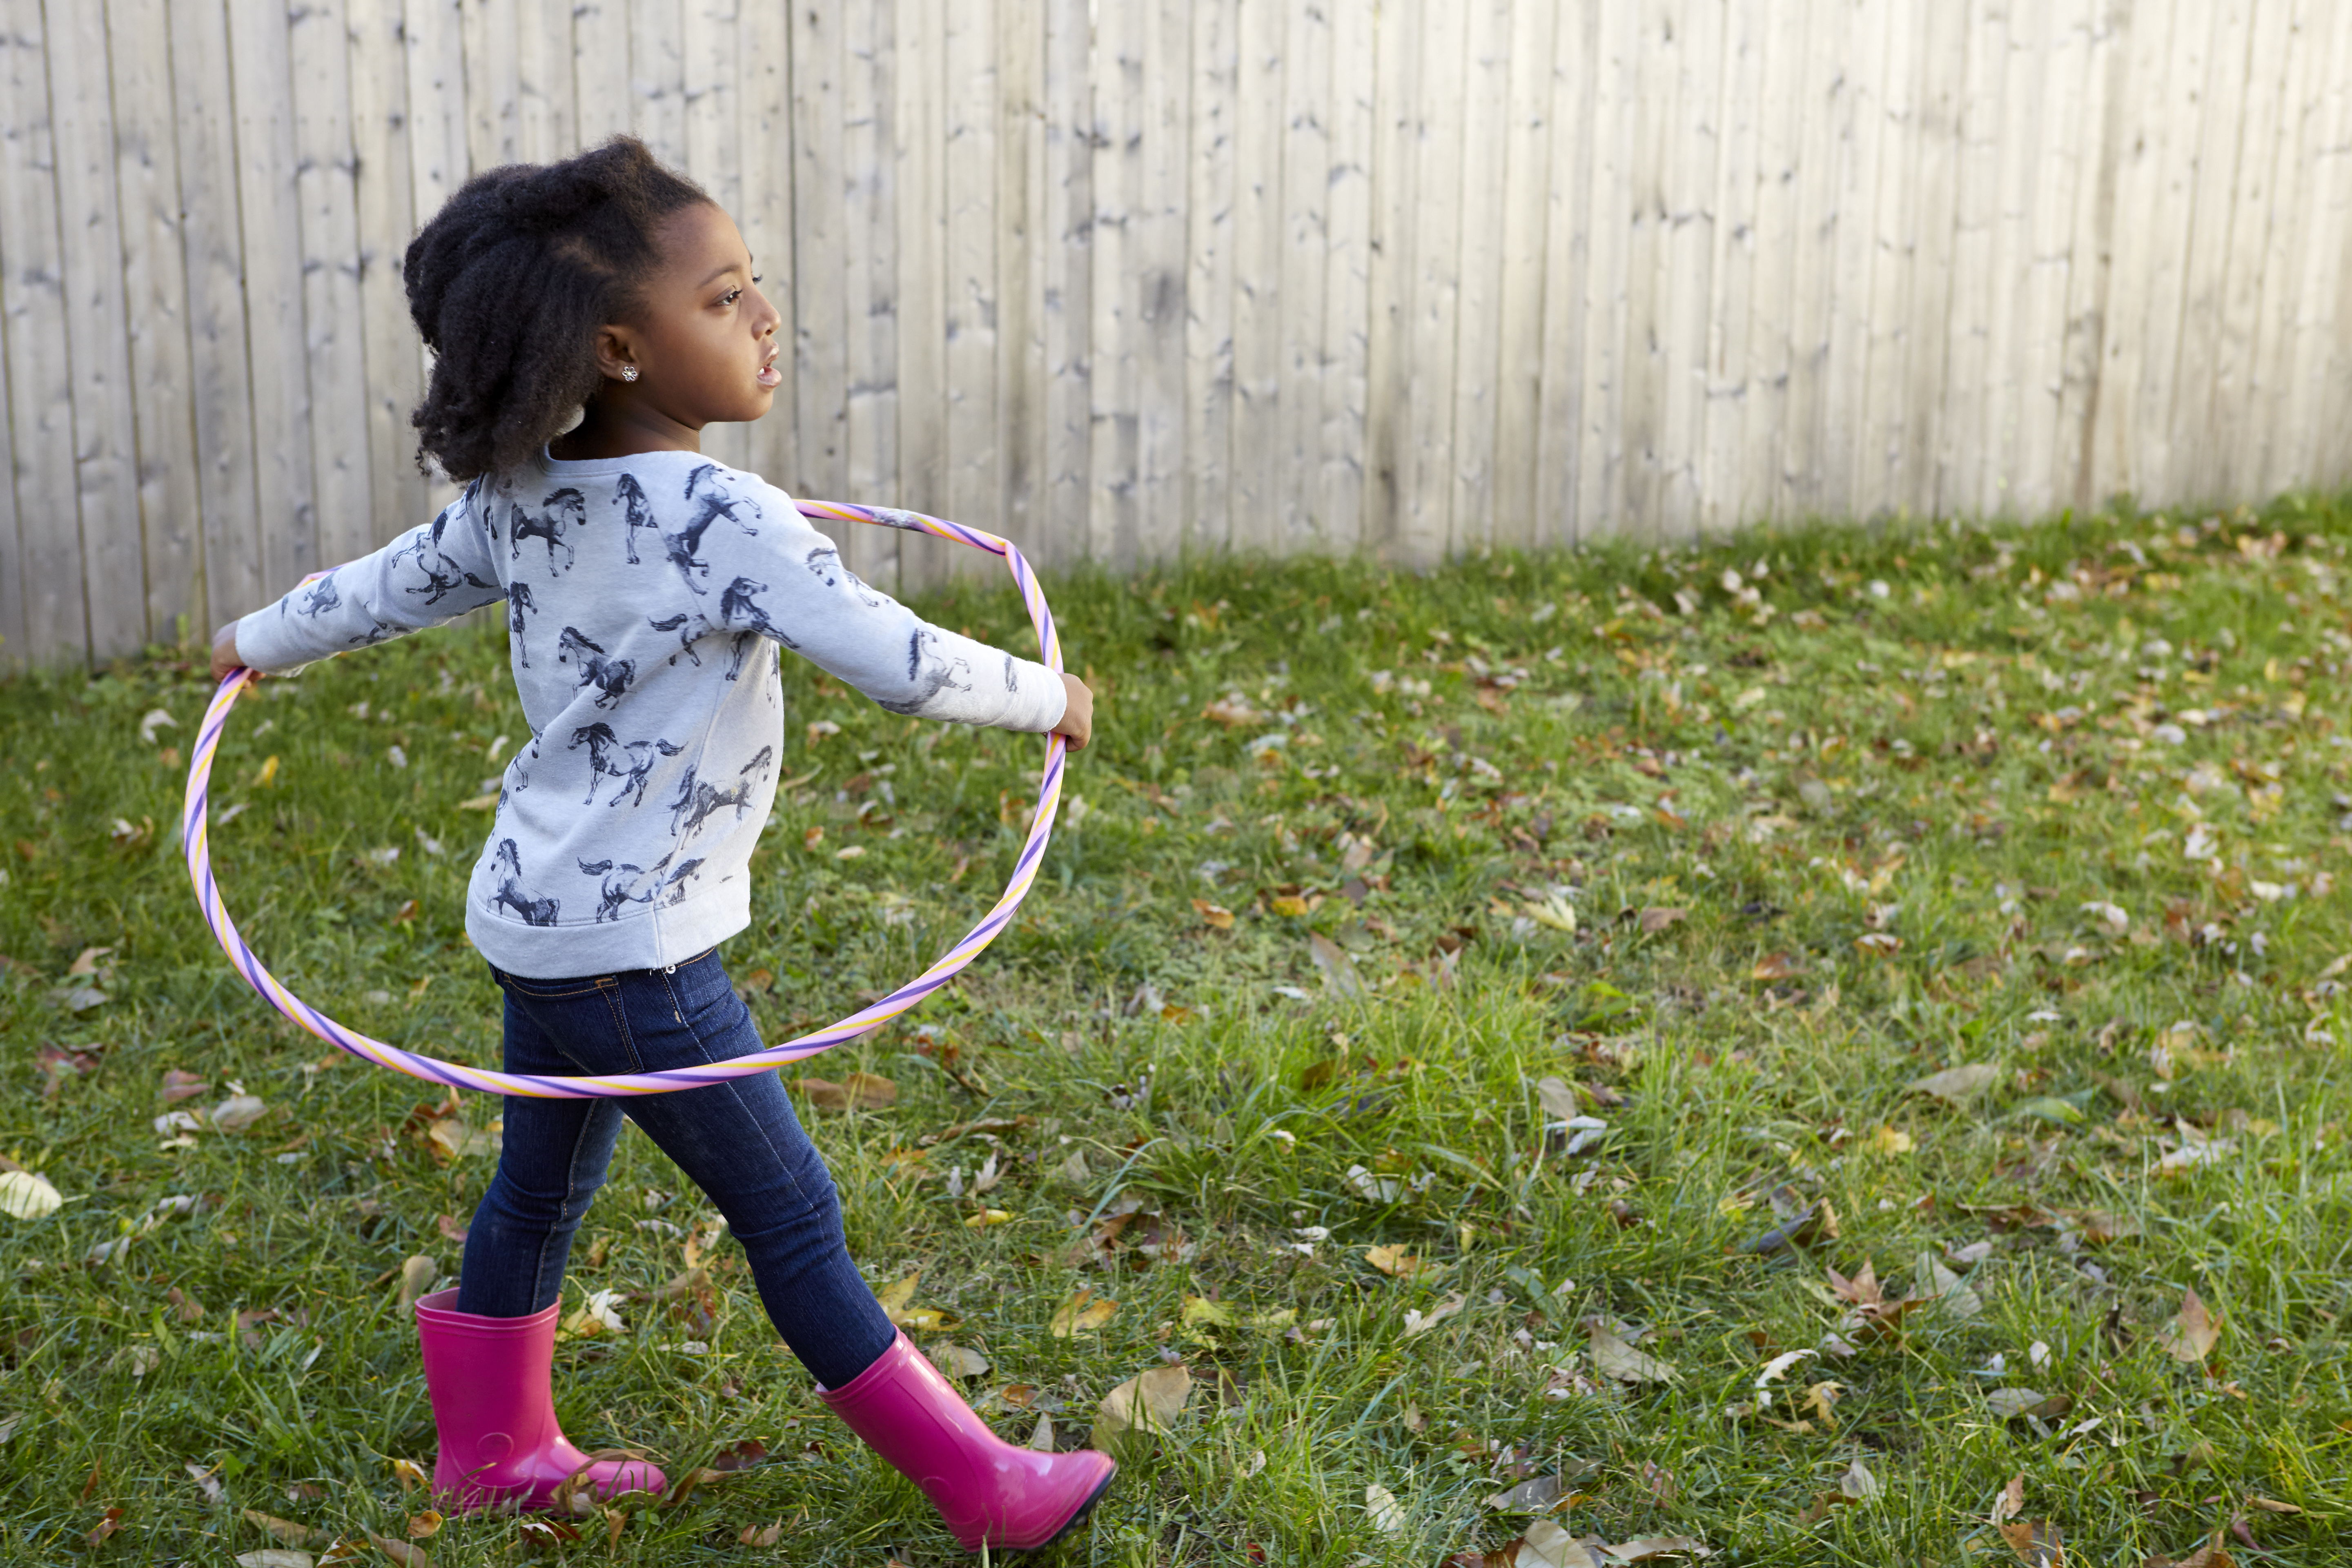 Cute girl playing in garden with plastic hoop